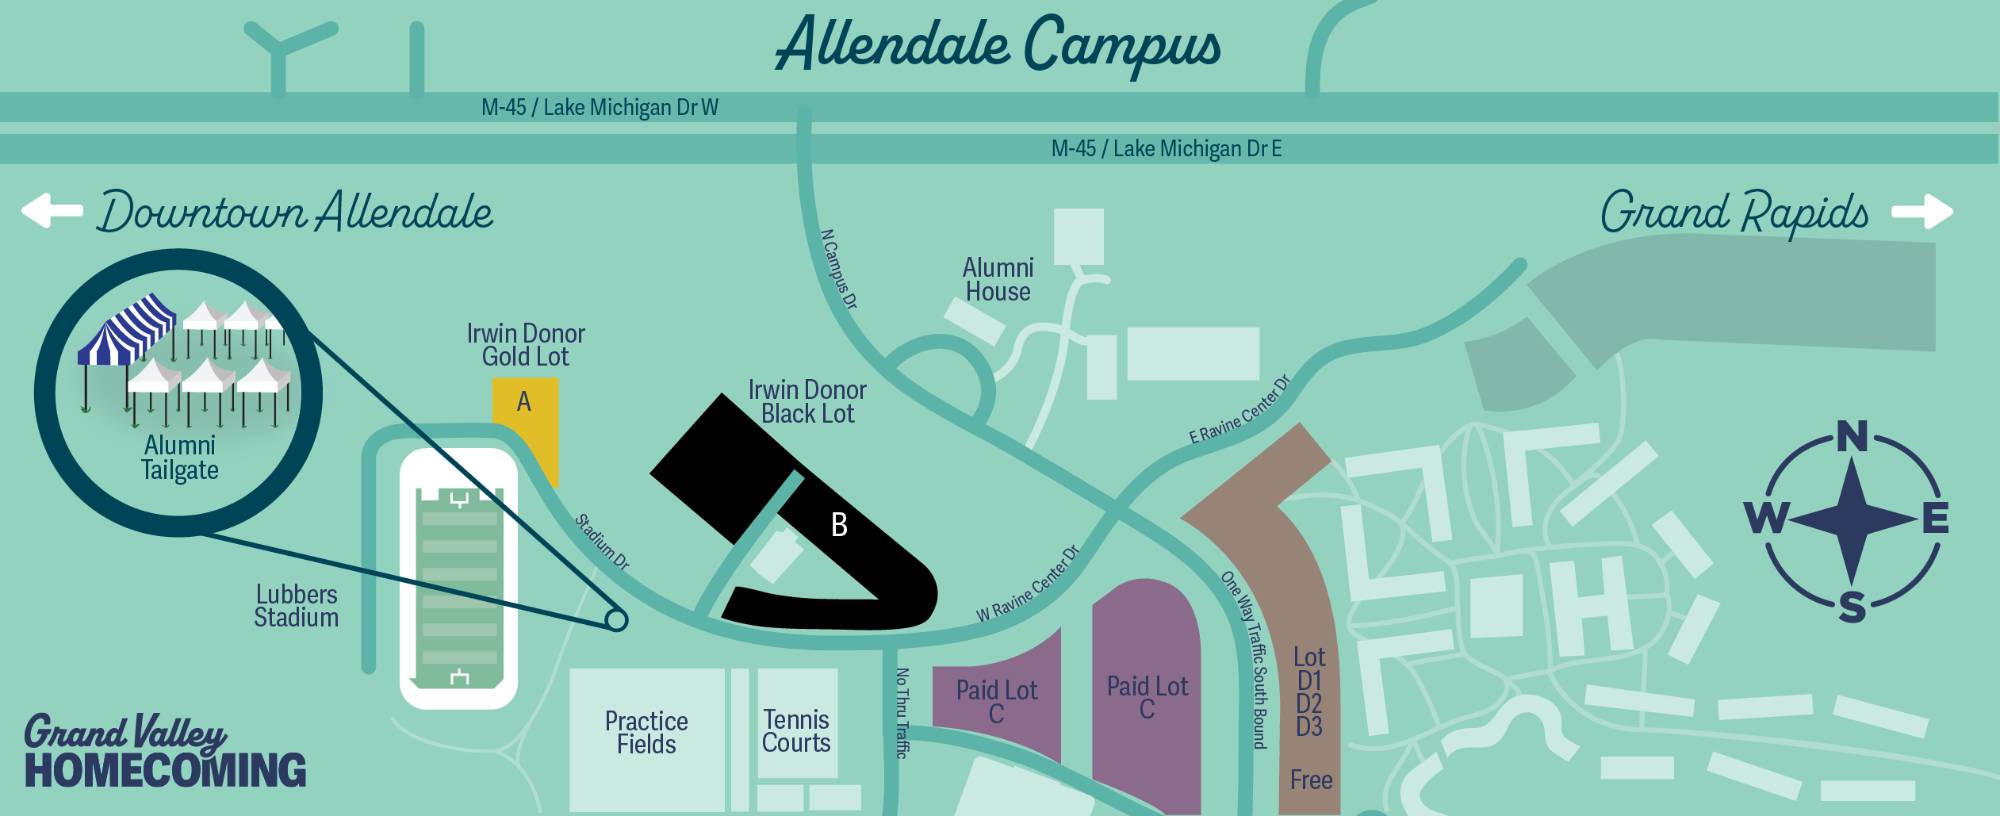 Map of the Allendale Campus showing the location of Reunion Row and Tailgate near Lubbers Stadium